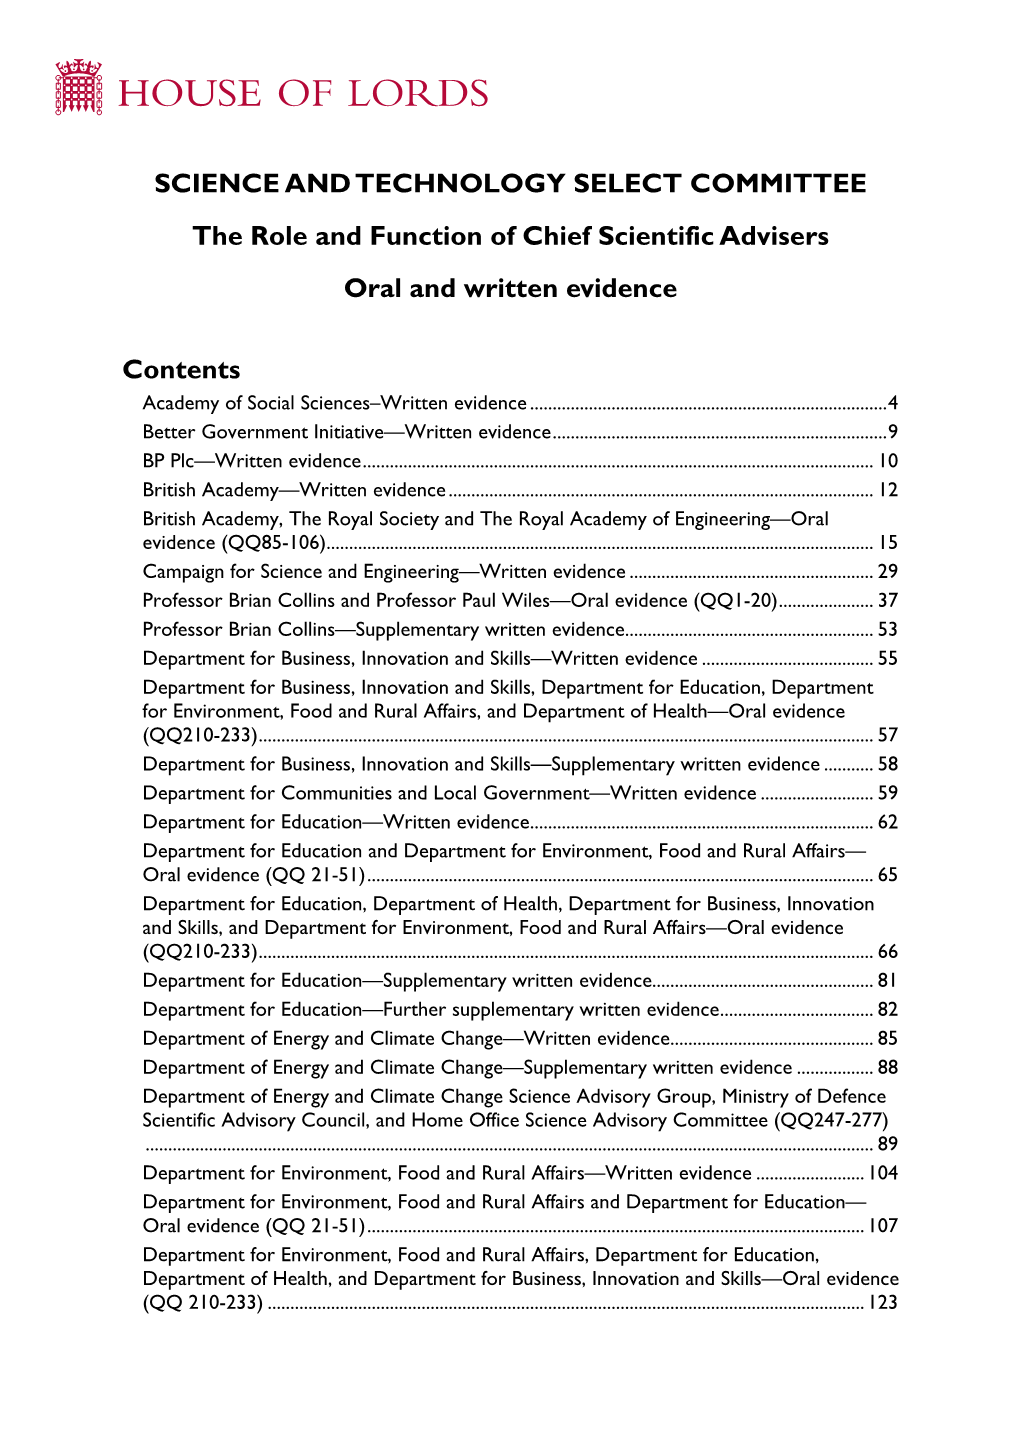 Chief Scientific Advisers Oral and Written Evidence